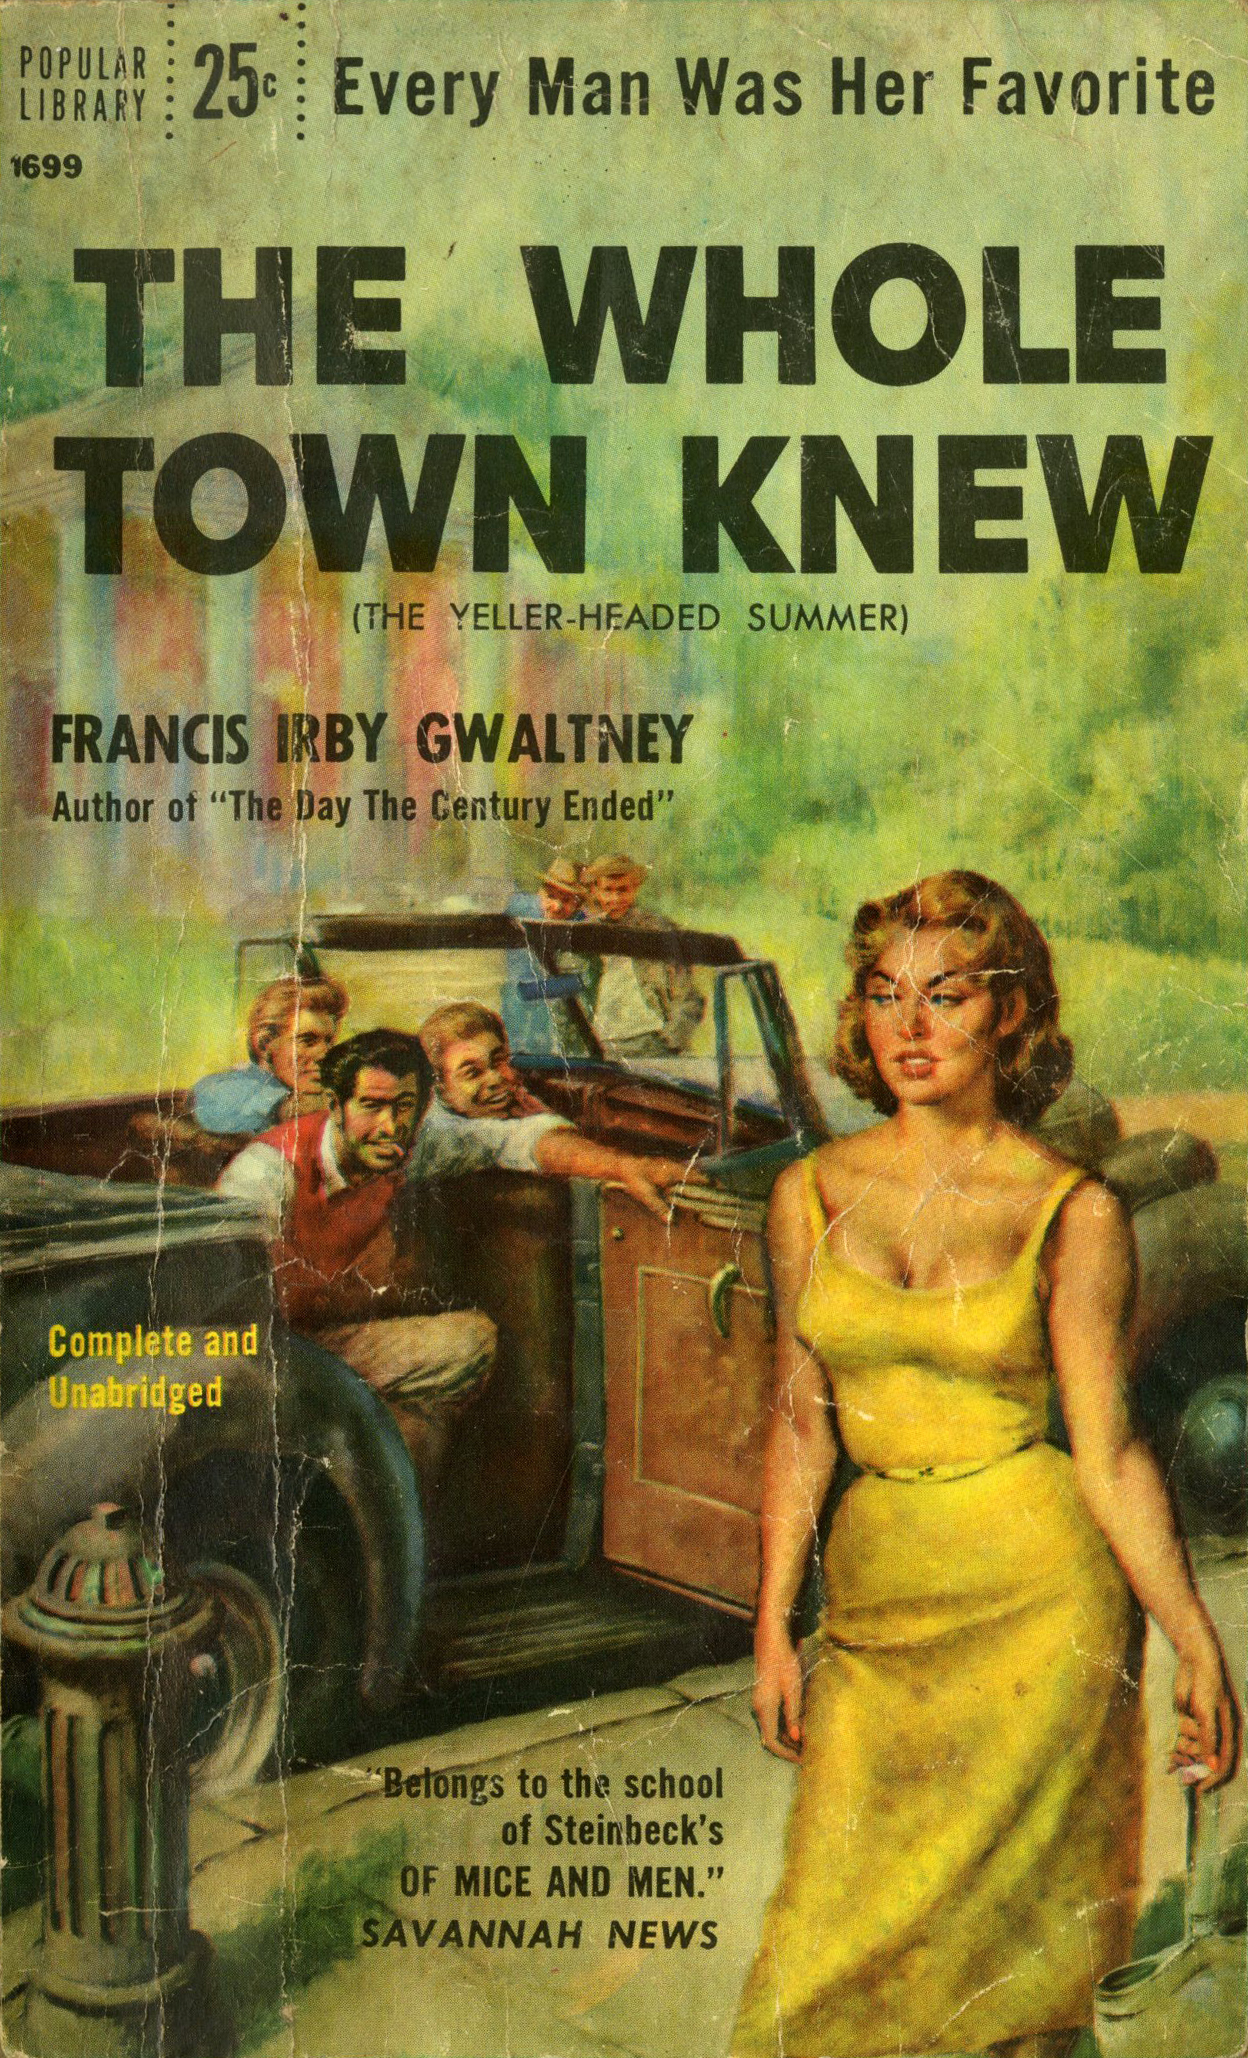 Cover of Francis Irby Gwaltney's The Whole Town Knew, 1956